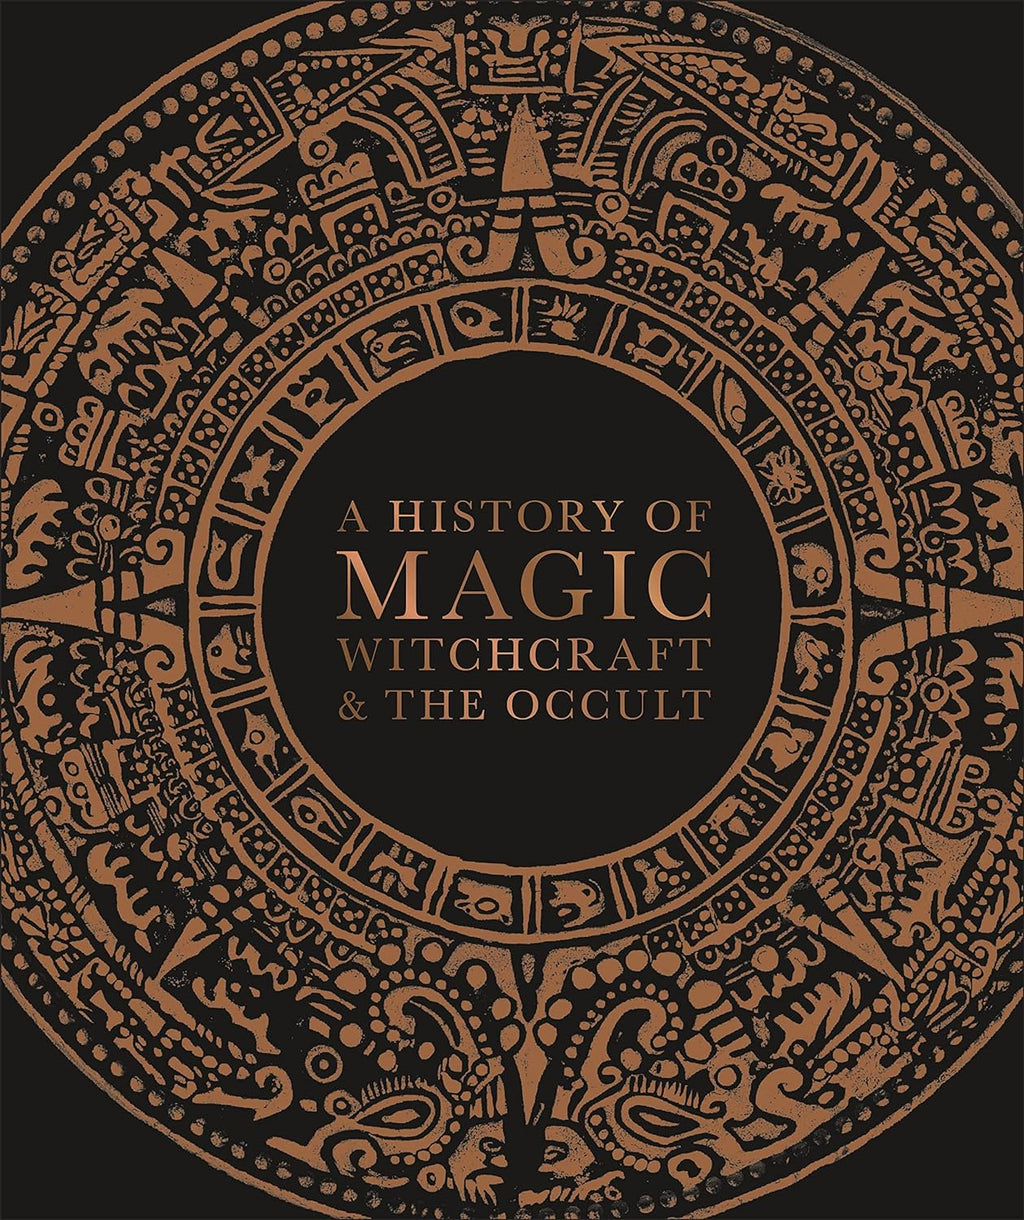 History of Magic, Witchcraft, and the Occult by Suzannah Lipscomb